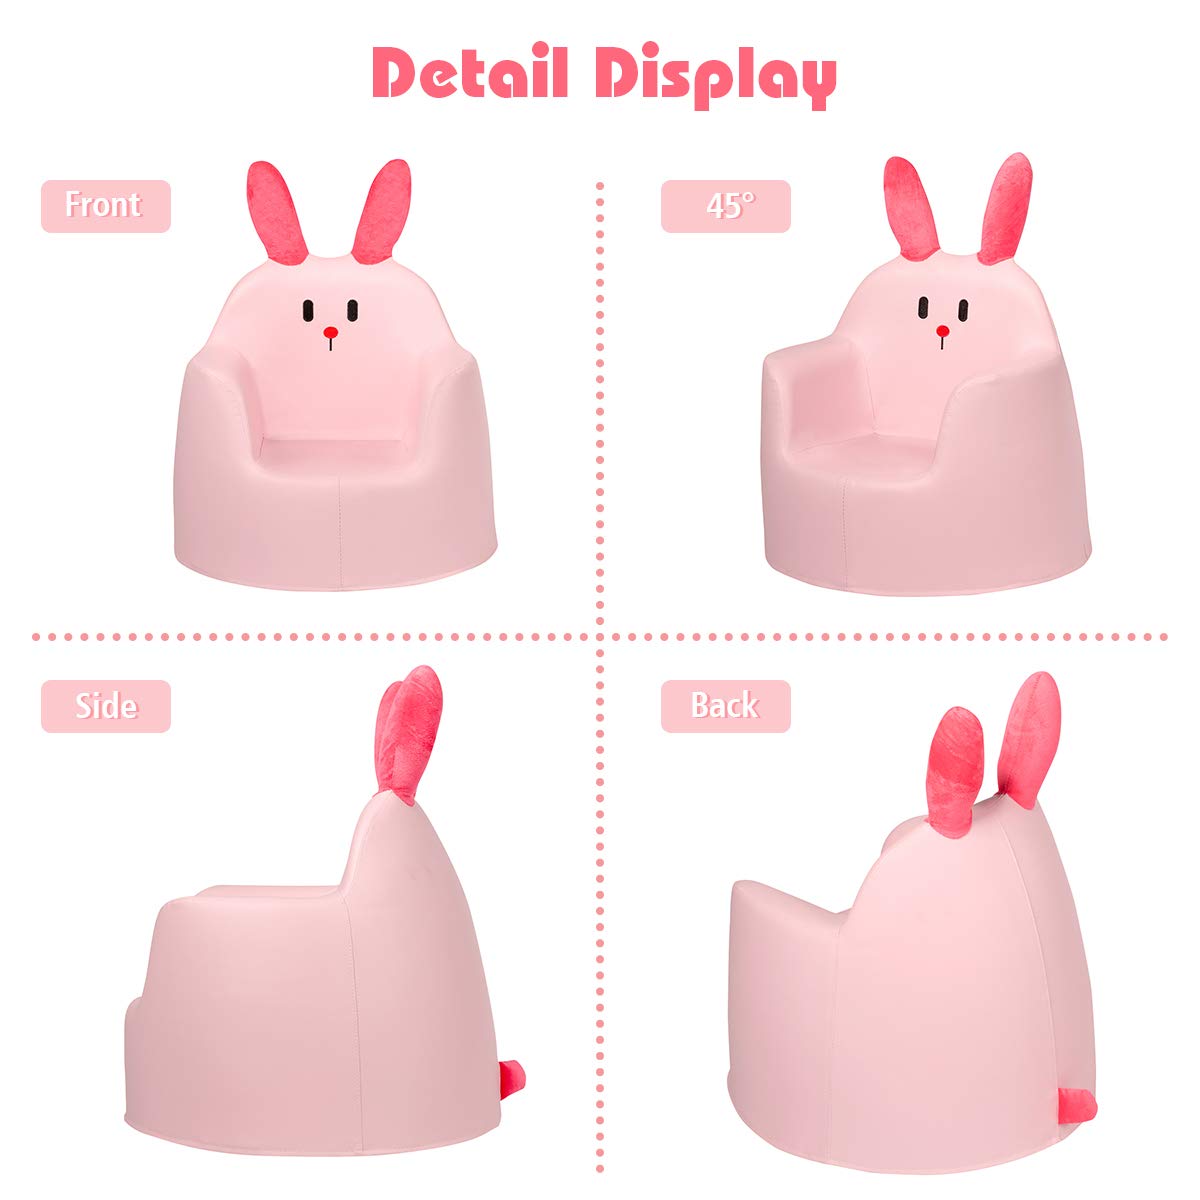 Giantex Children’s Sofa, Cartoon Rabbit Kids Armchair, Upholstered Baby Sofa Seat with Soft PVC Cloth and Stable Sponge, Suitable for Toddlers